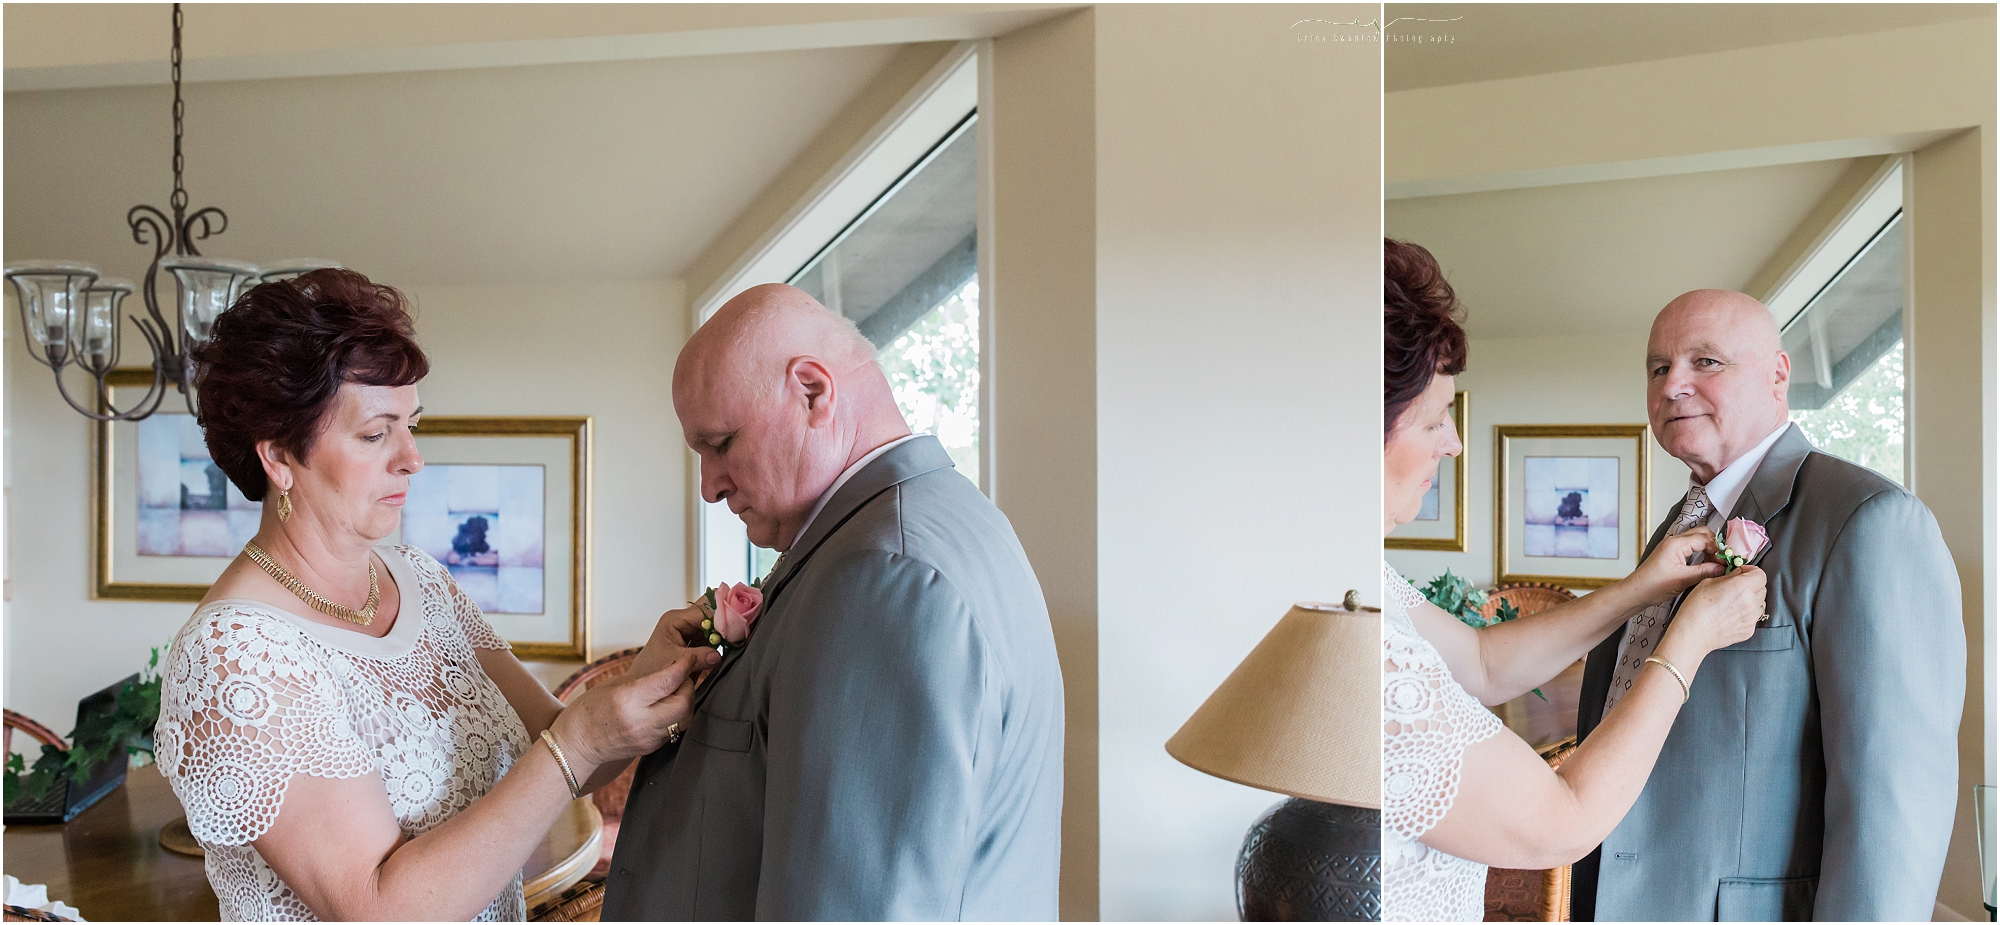 The father of the bride gets ready as the mother of the bride pins his boutonniere to his lapel. 